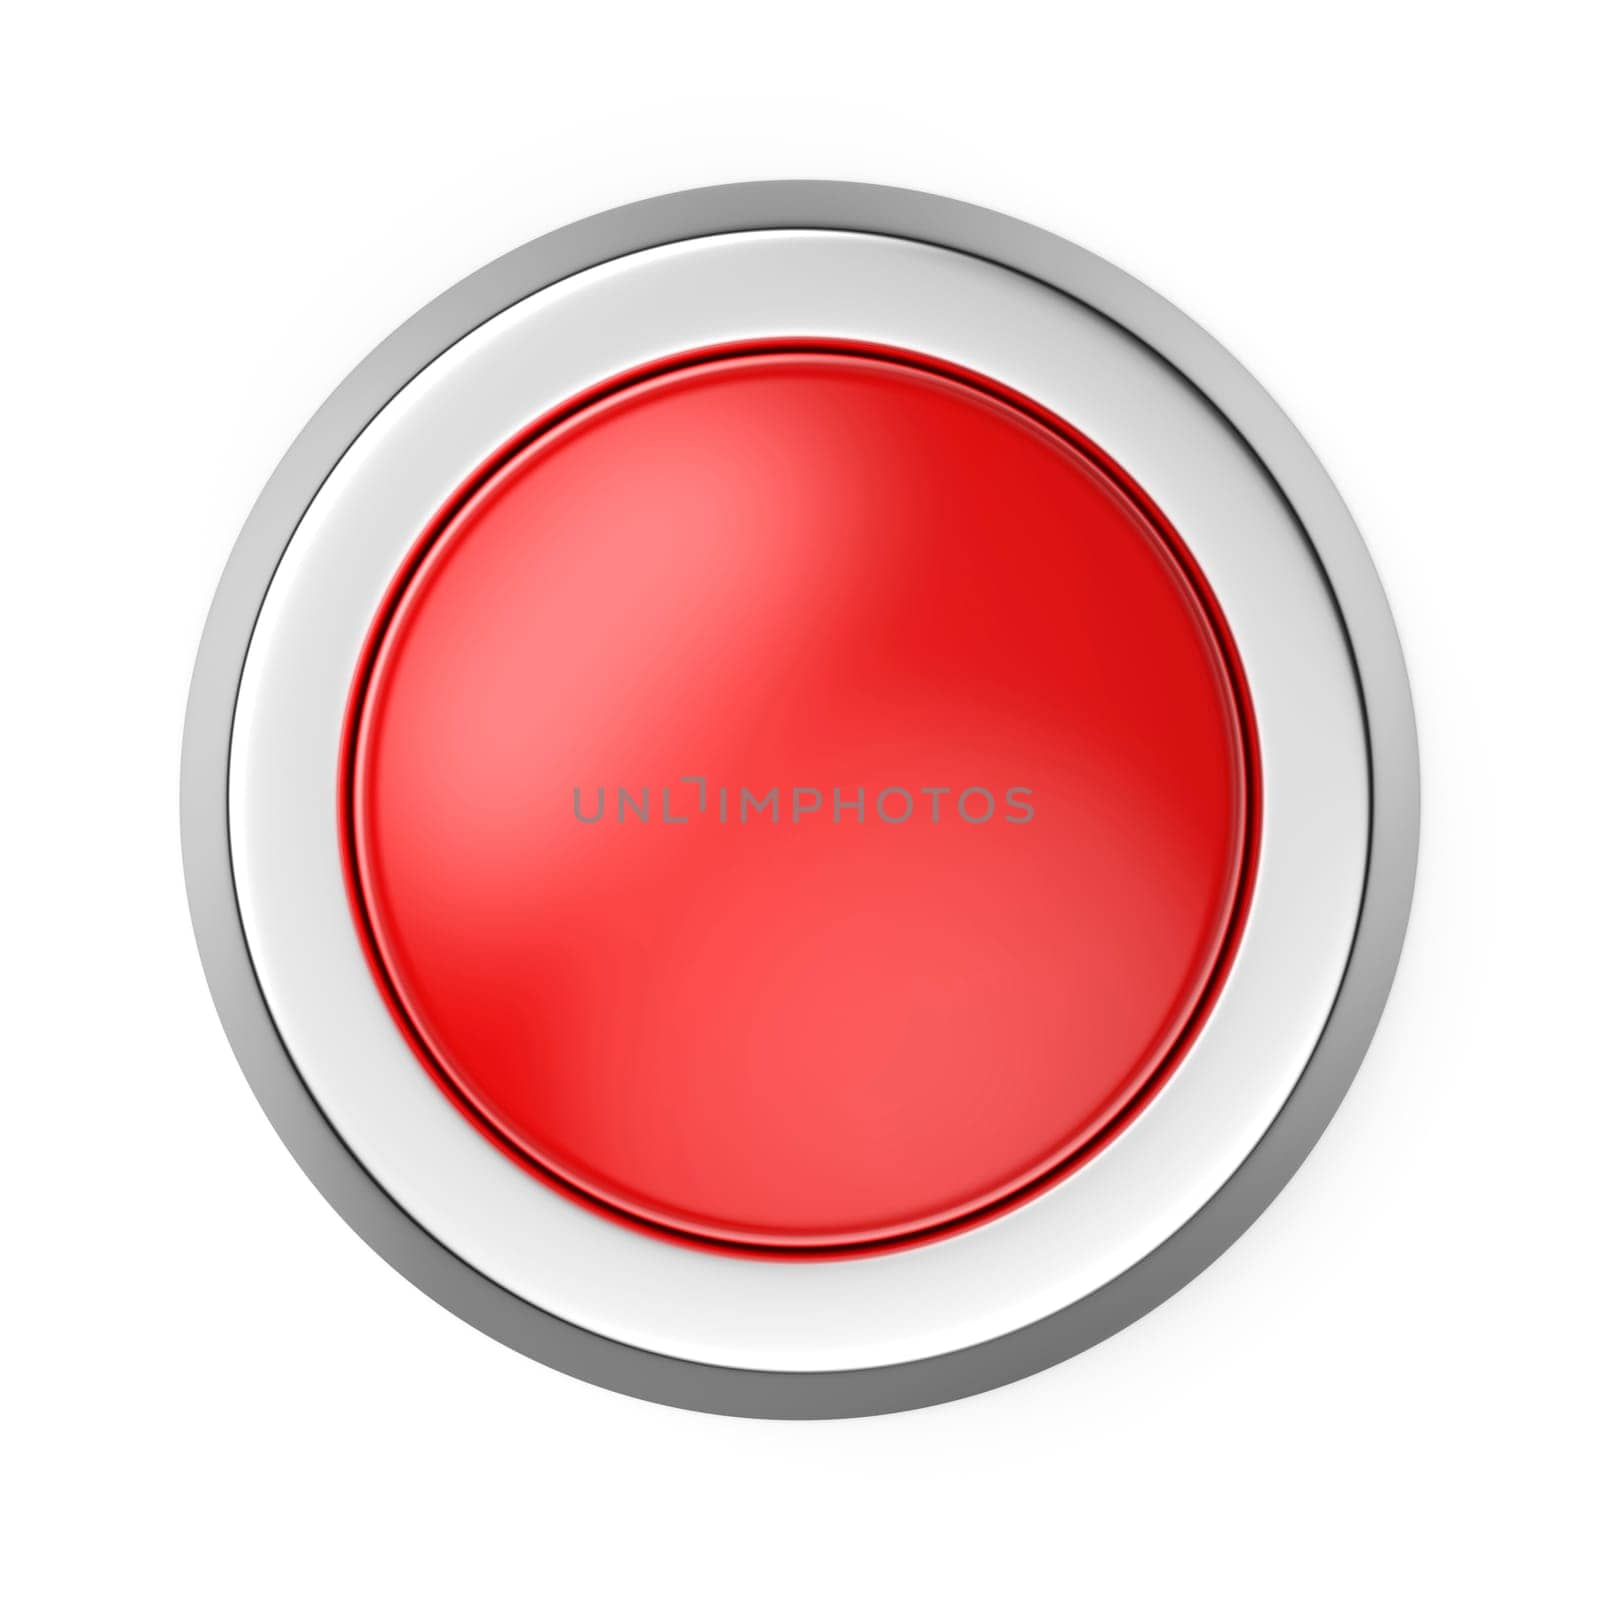 Round red emergency button by magraphics